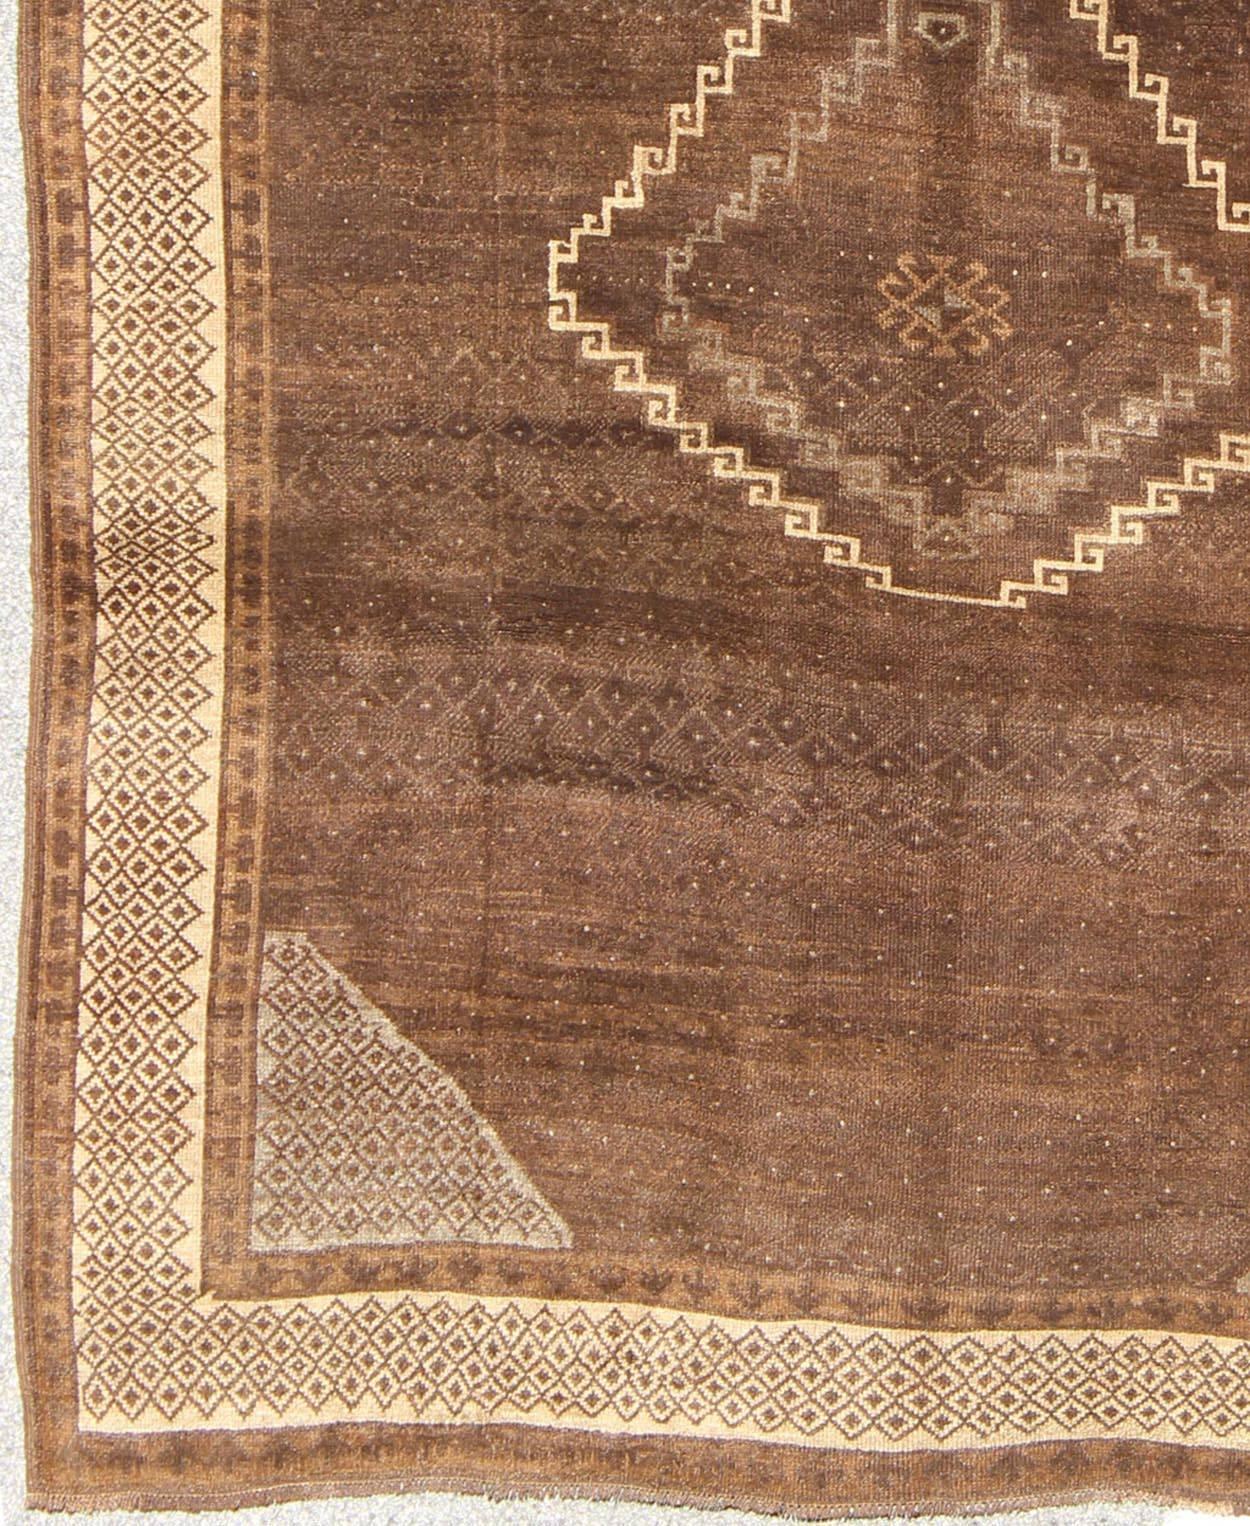 Measures: 7'7 x 10'4.
This wonderful Turkish rug, from eastern Turkey, displays a chocolate brown background with a small, repeating geometric pattern in the background and border.

Vintage Turkish Kars rug with a Modern Design in shades of brown